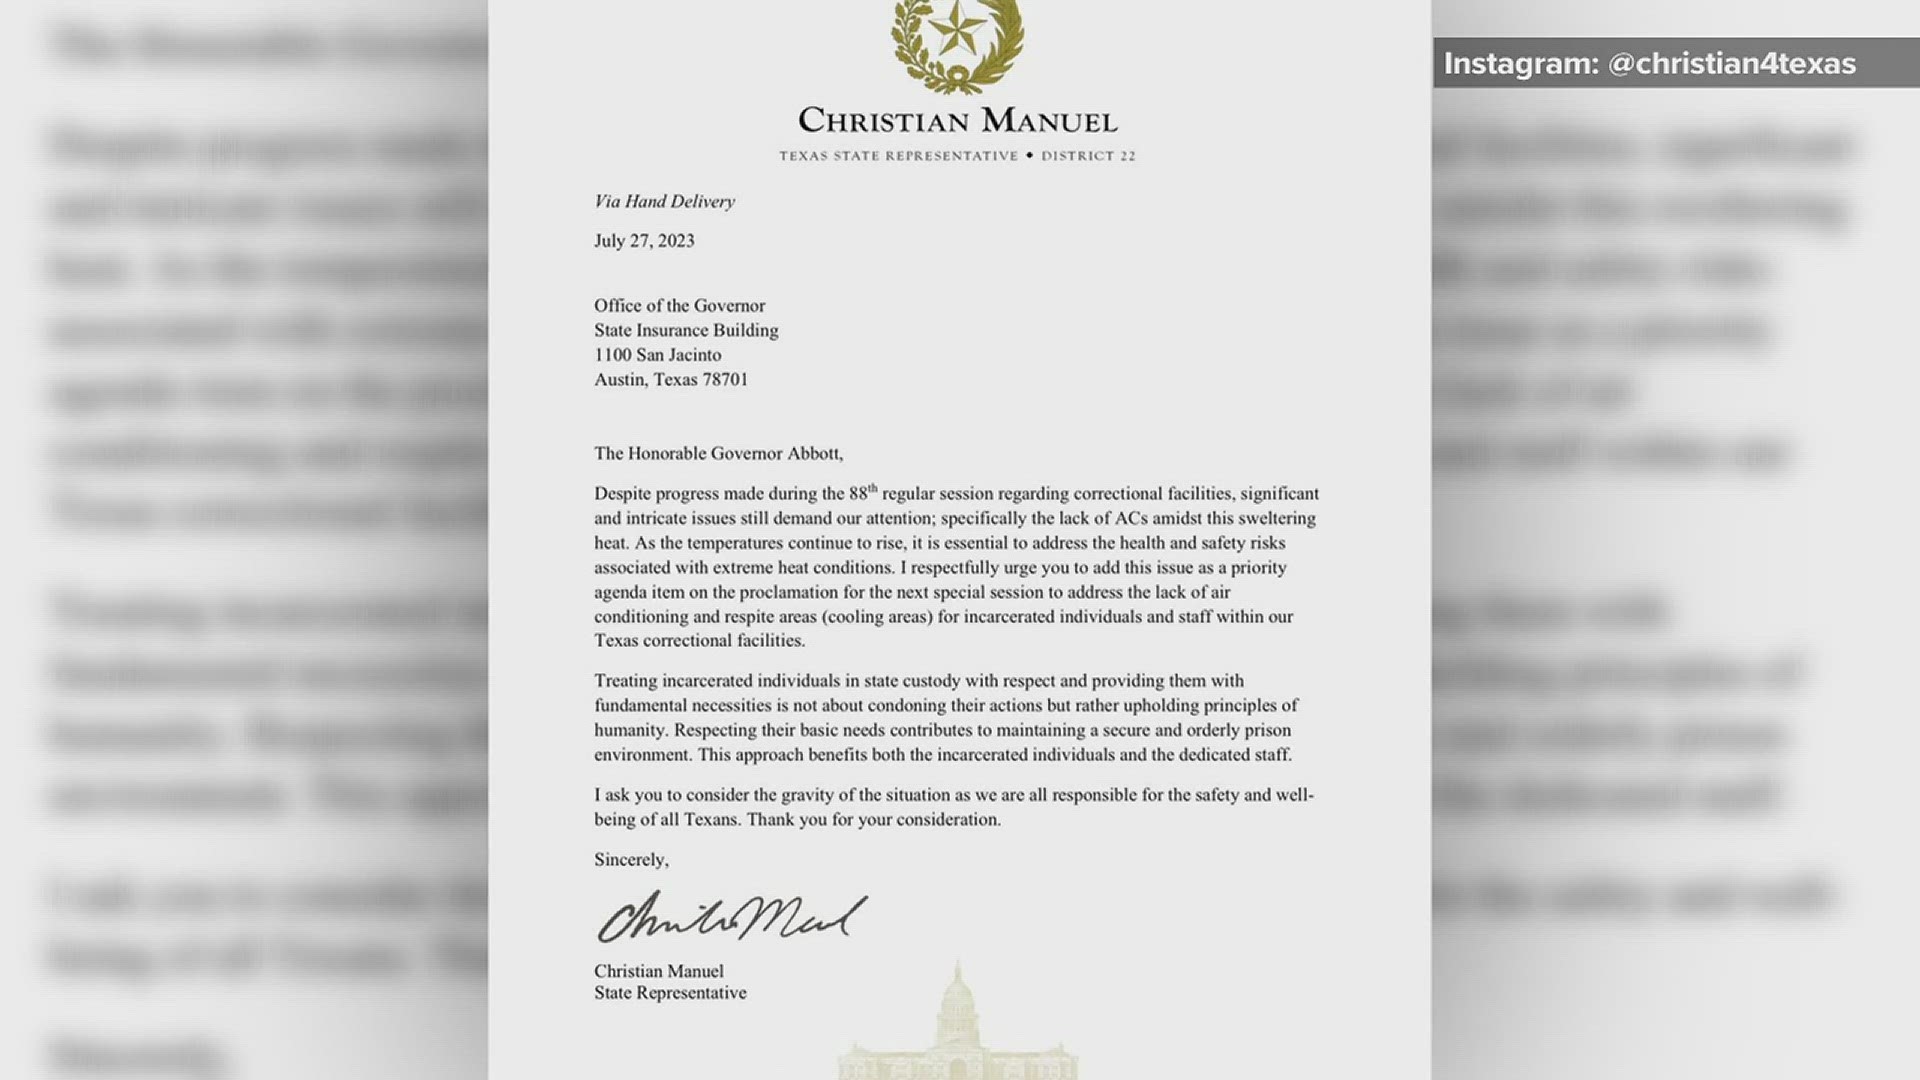 Rep. Manuel along with 28 Democrat representatives are urging Governor Abbott to make the issue a priority agenda item.